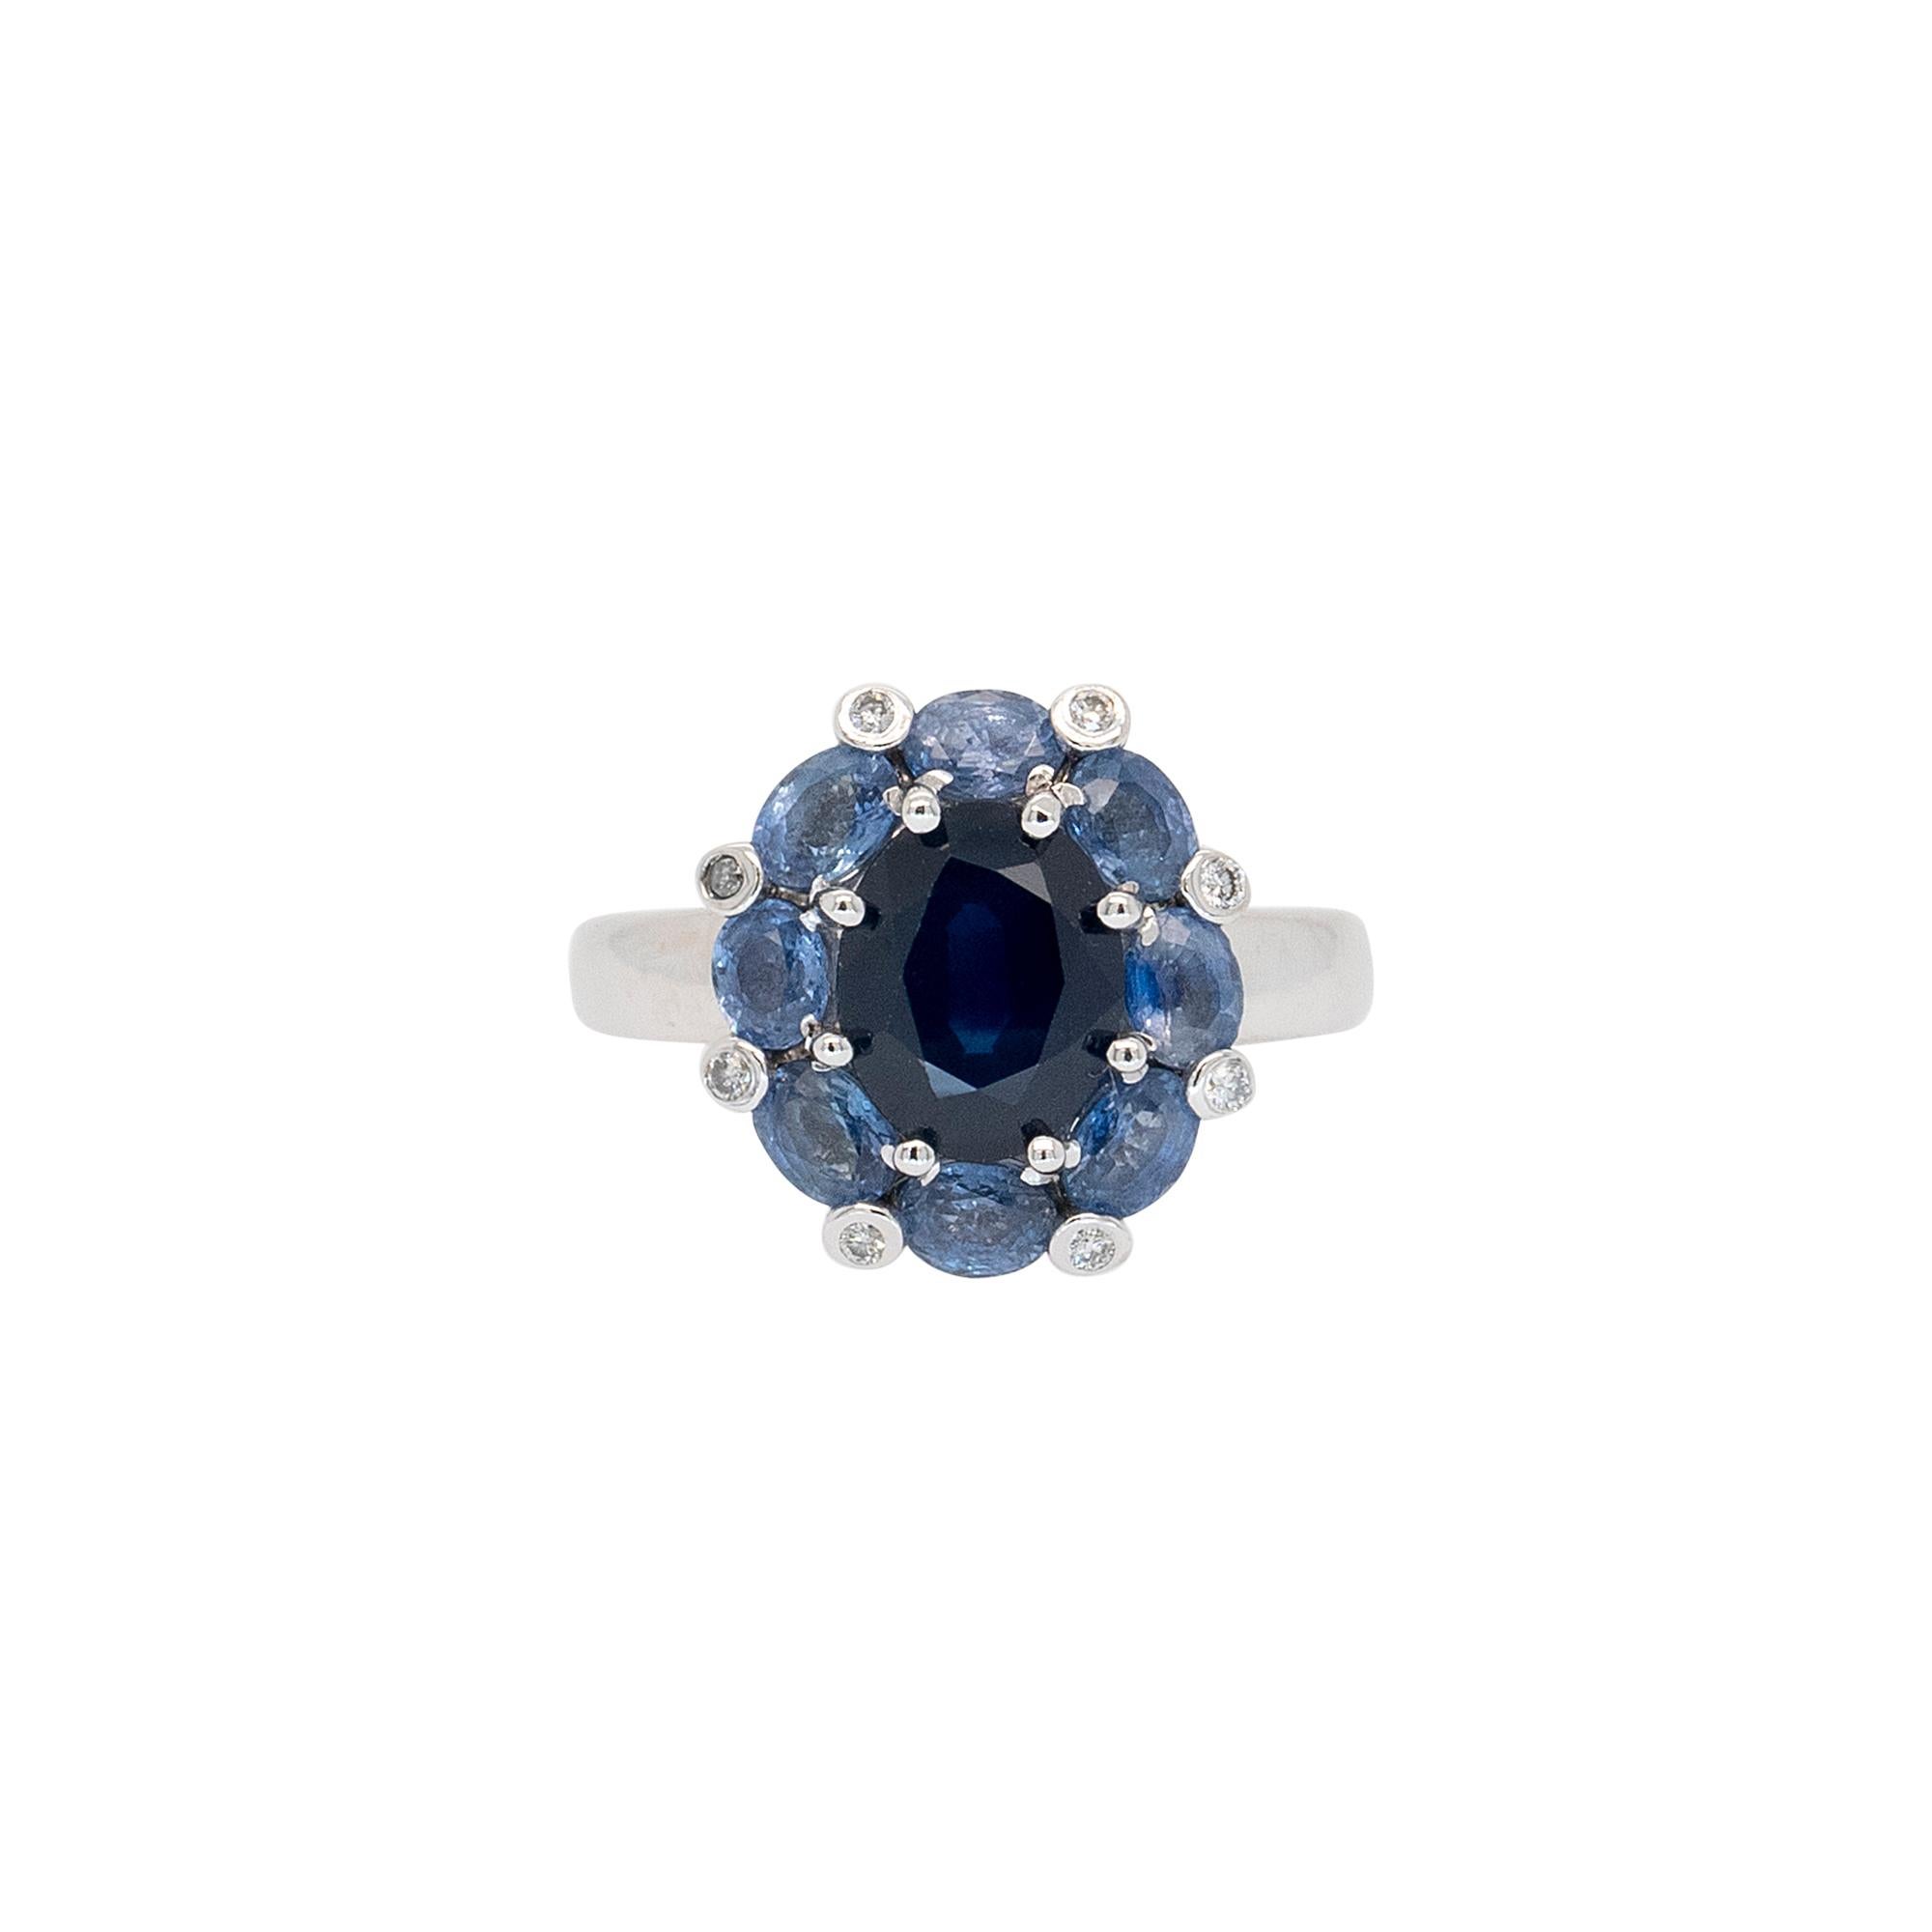 Stone Details:
Center Dark Tone Sapphire Approx 2.00ct
Medium Saturation Pastel Sapphire Halo 2.8ctw
Ring Material: 14k White Gold
Ring Size: 7.25 (can be sized)
Total Weight: 5.6g (3.6dwt)
This item comes with a presentation box!
SKU: